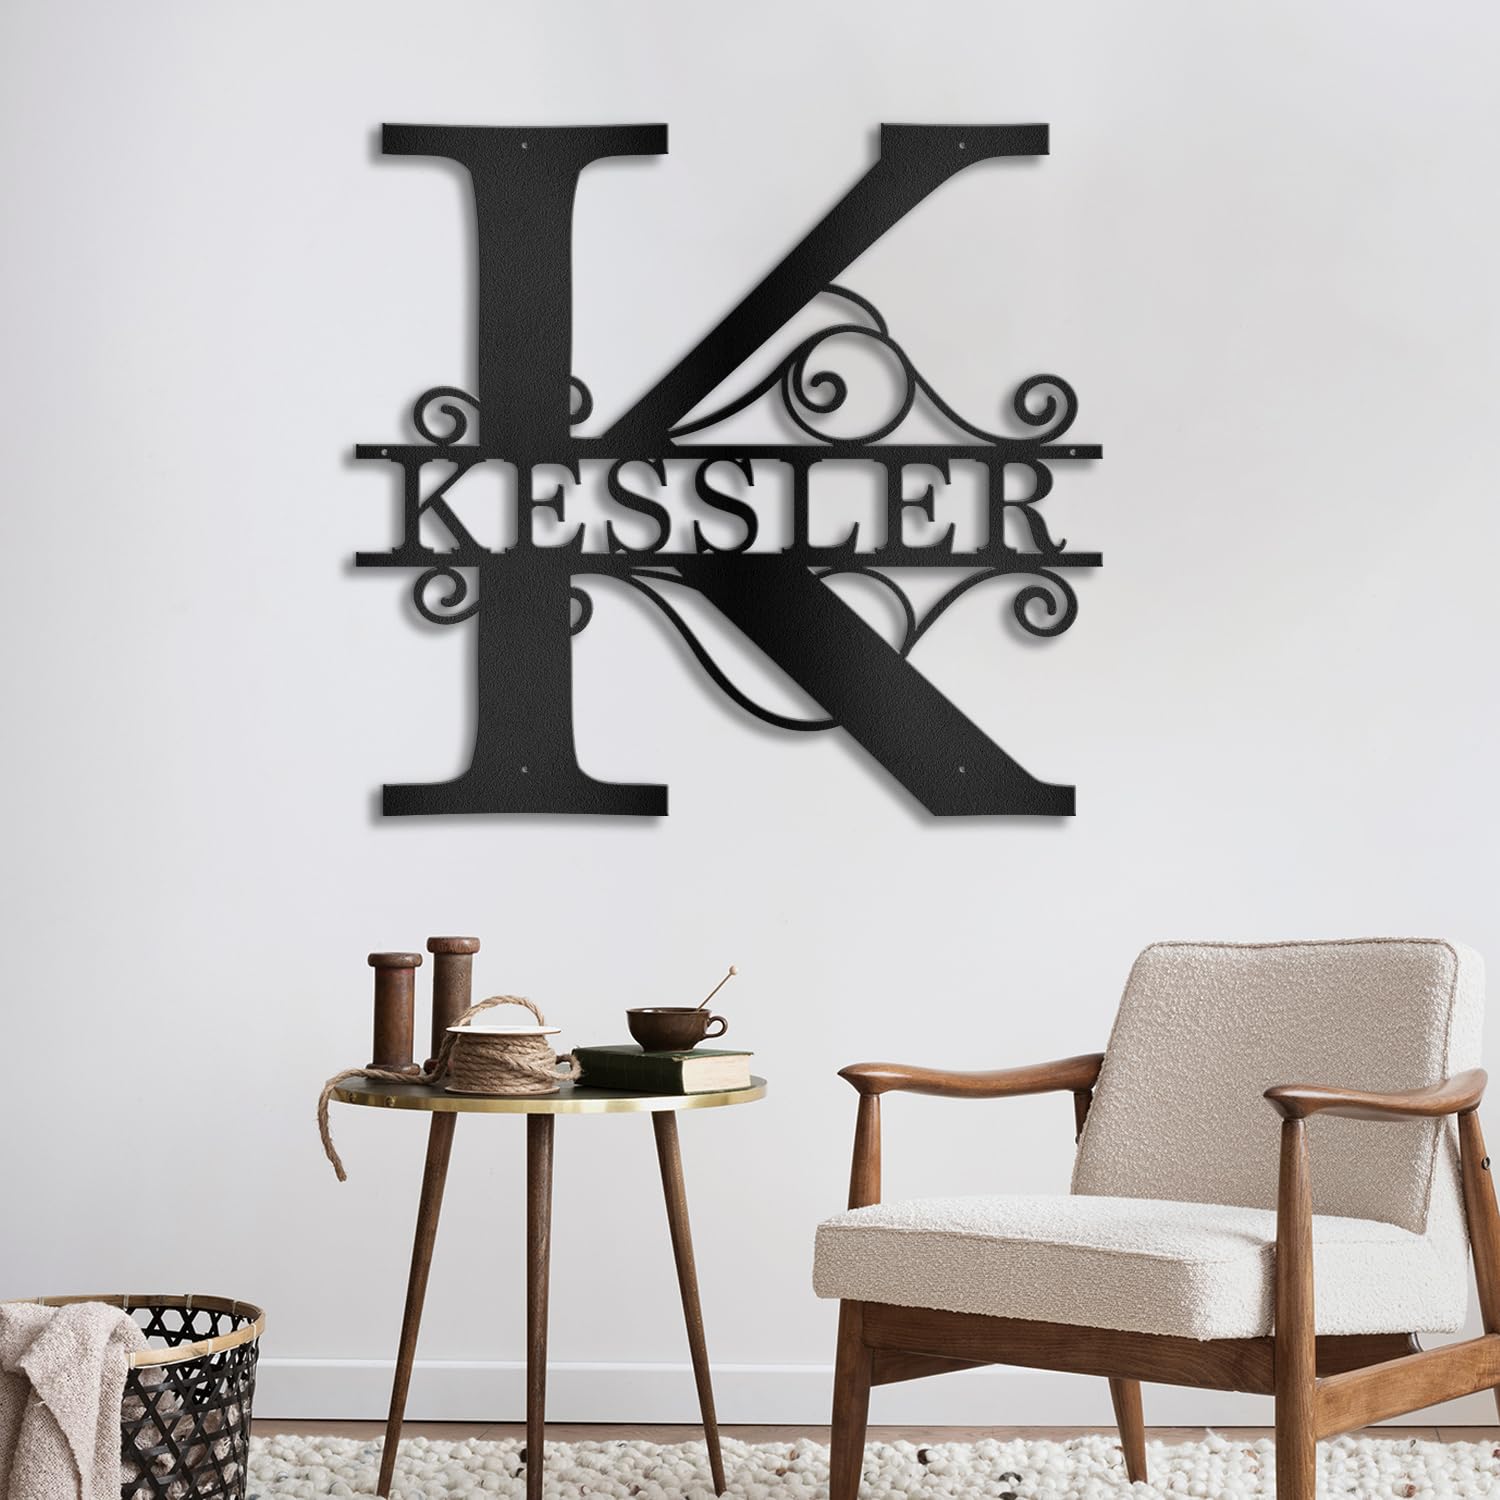 Personalized Metal Signs Family Name Sign Metal Wall Art Split Letter Monogram Wall Decor